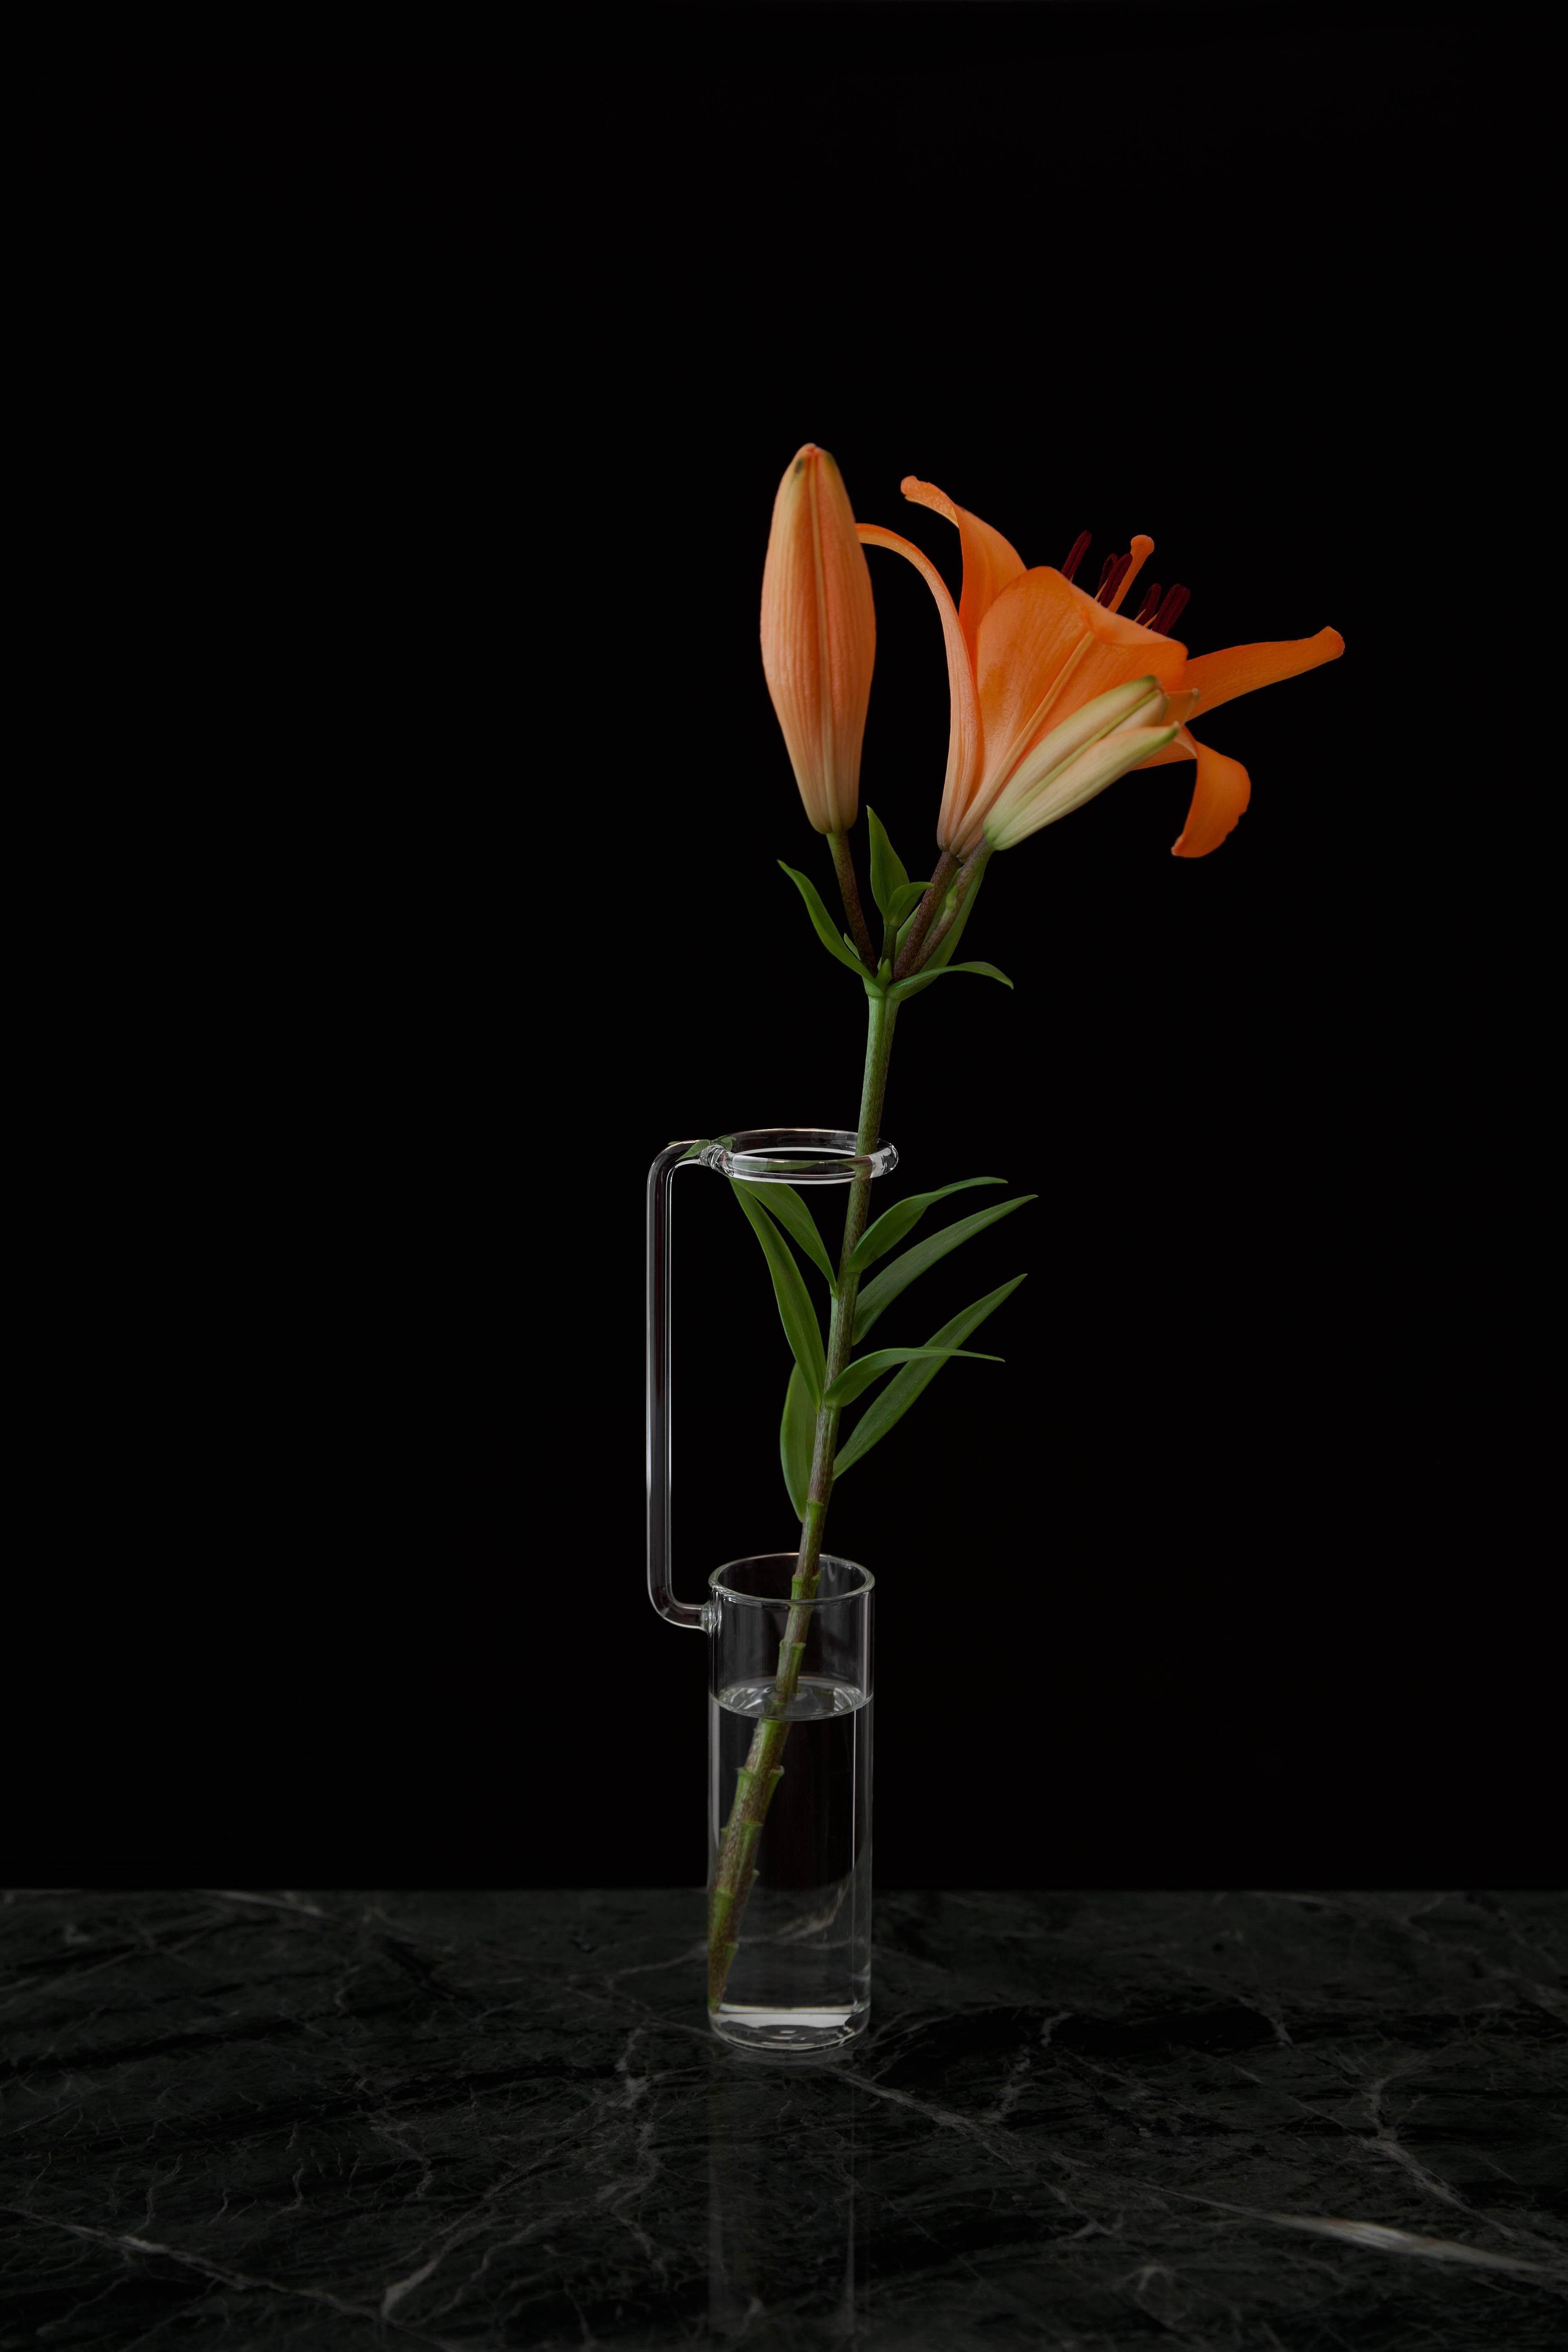 Vase designed by Adolfo Abejon

Measures: 63 × 42 × 232 mm (L × W × H). Glass.

Melancholia is a series of handmade glass vases. Inspired by laboratory test tubes, they turn flowers into study and contemplation elements. There are no